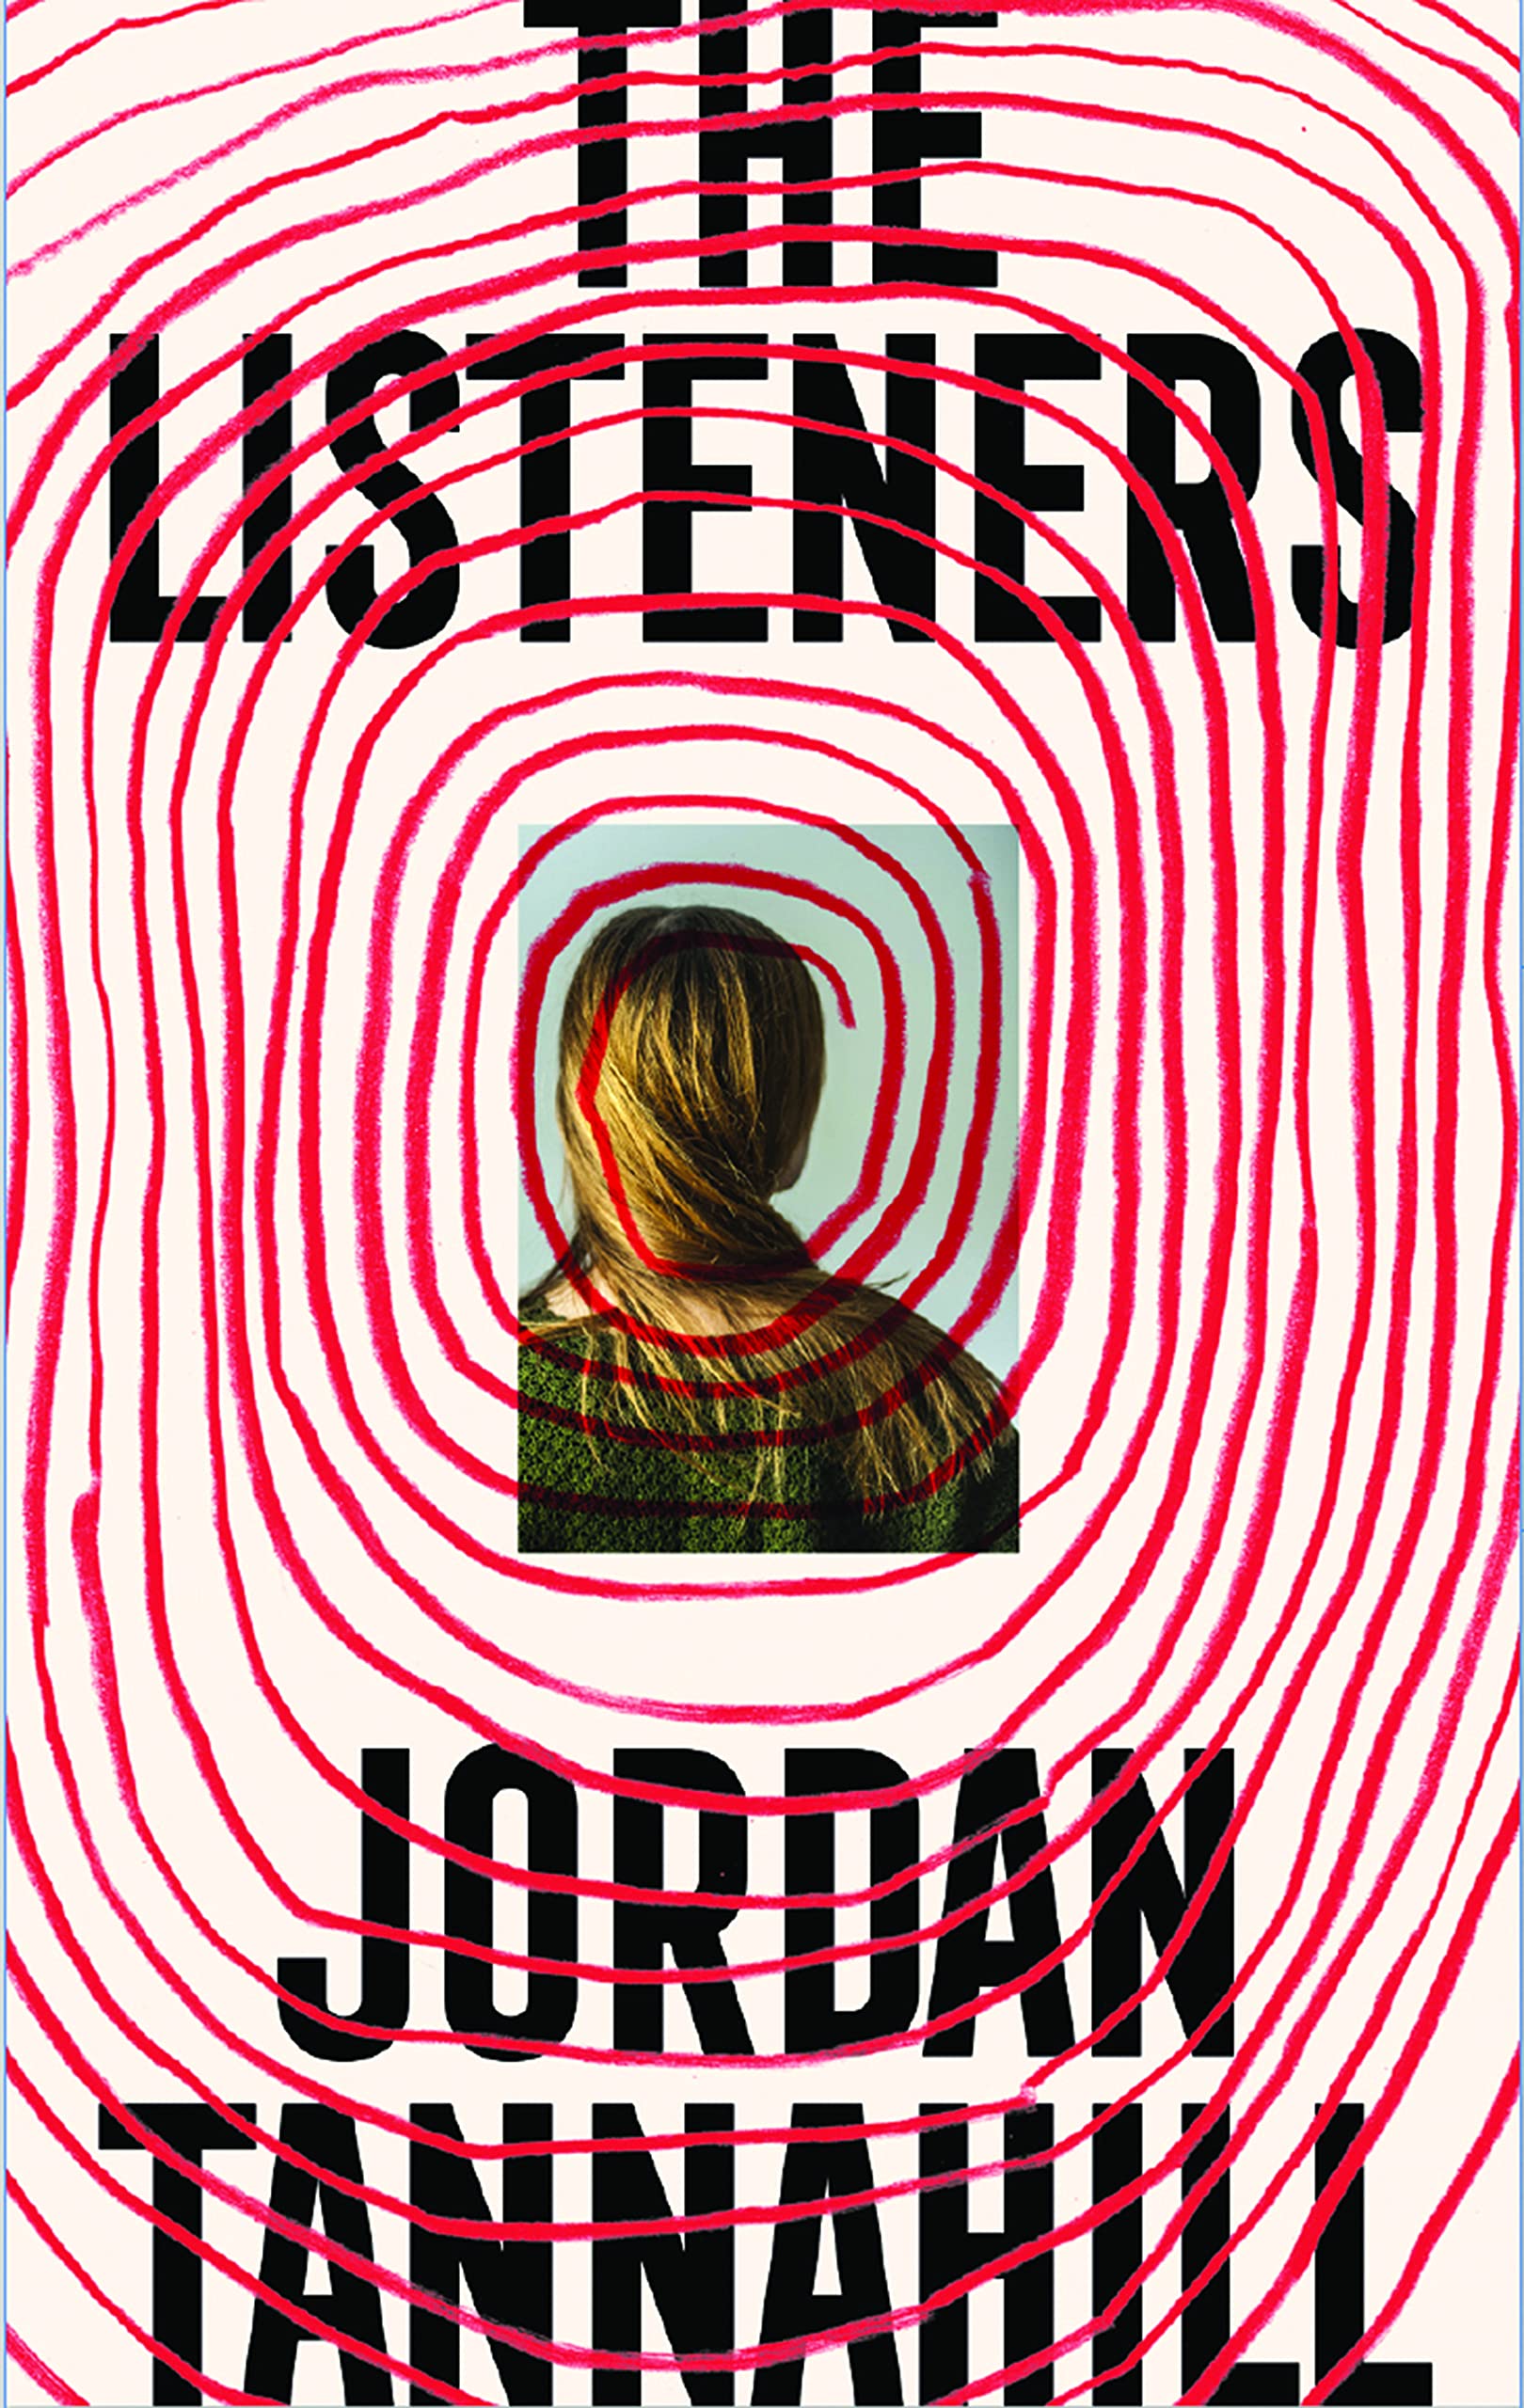 The cover of The Listenerr.